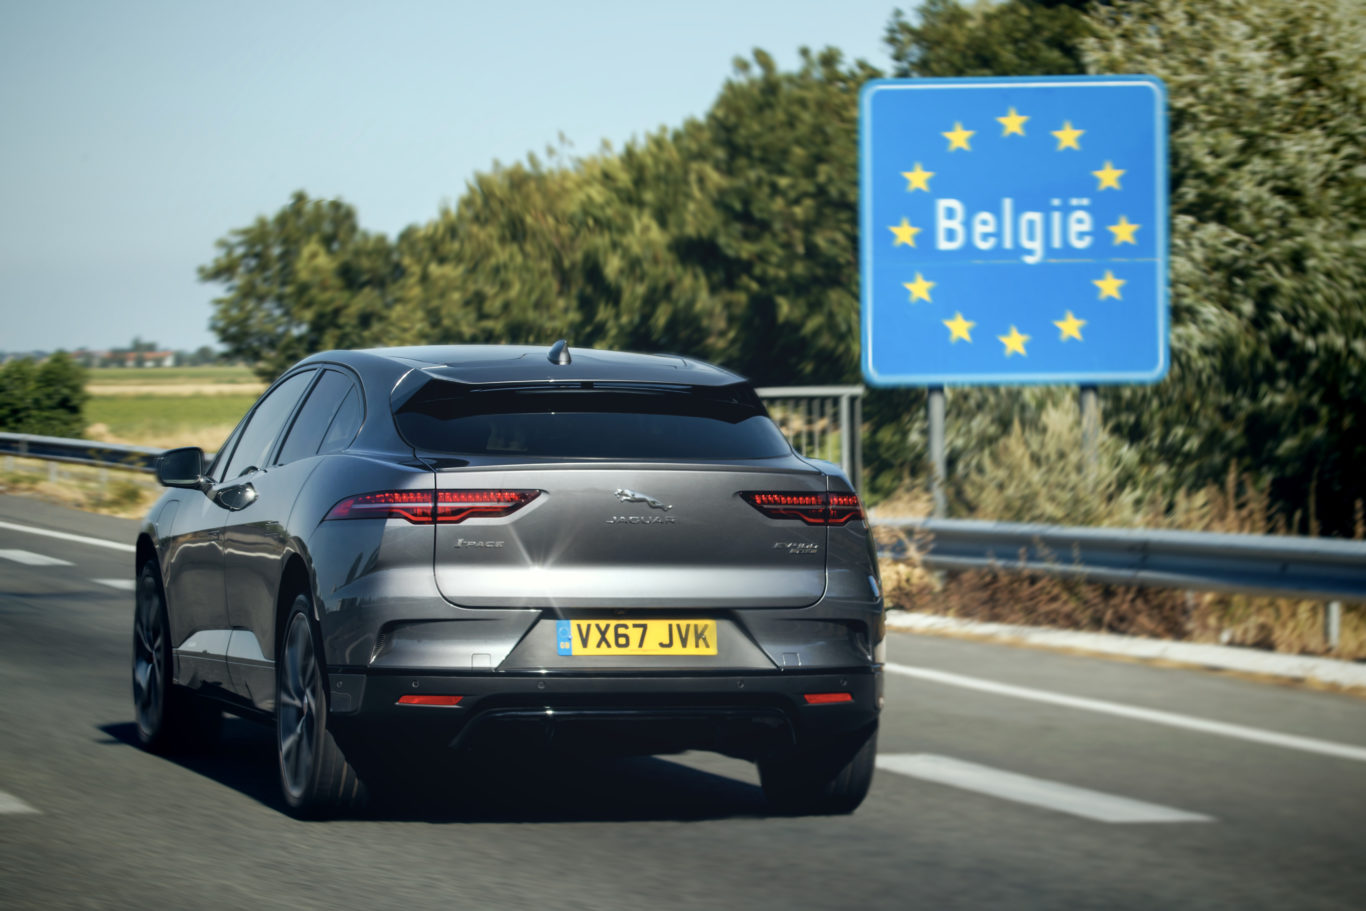 The I-Pace managed to trip from London to Brussels on a single charge